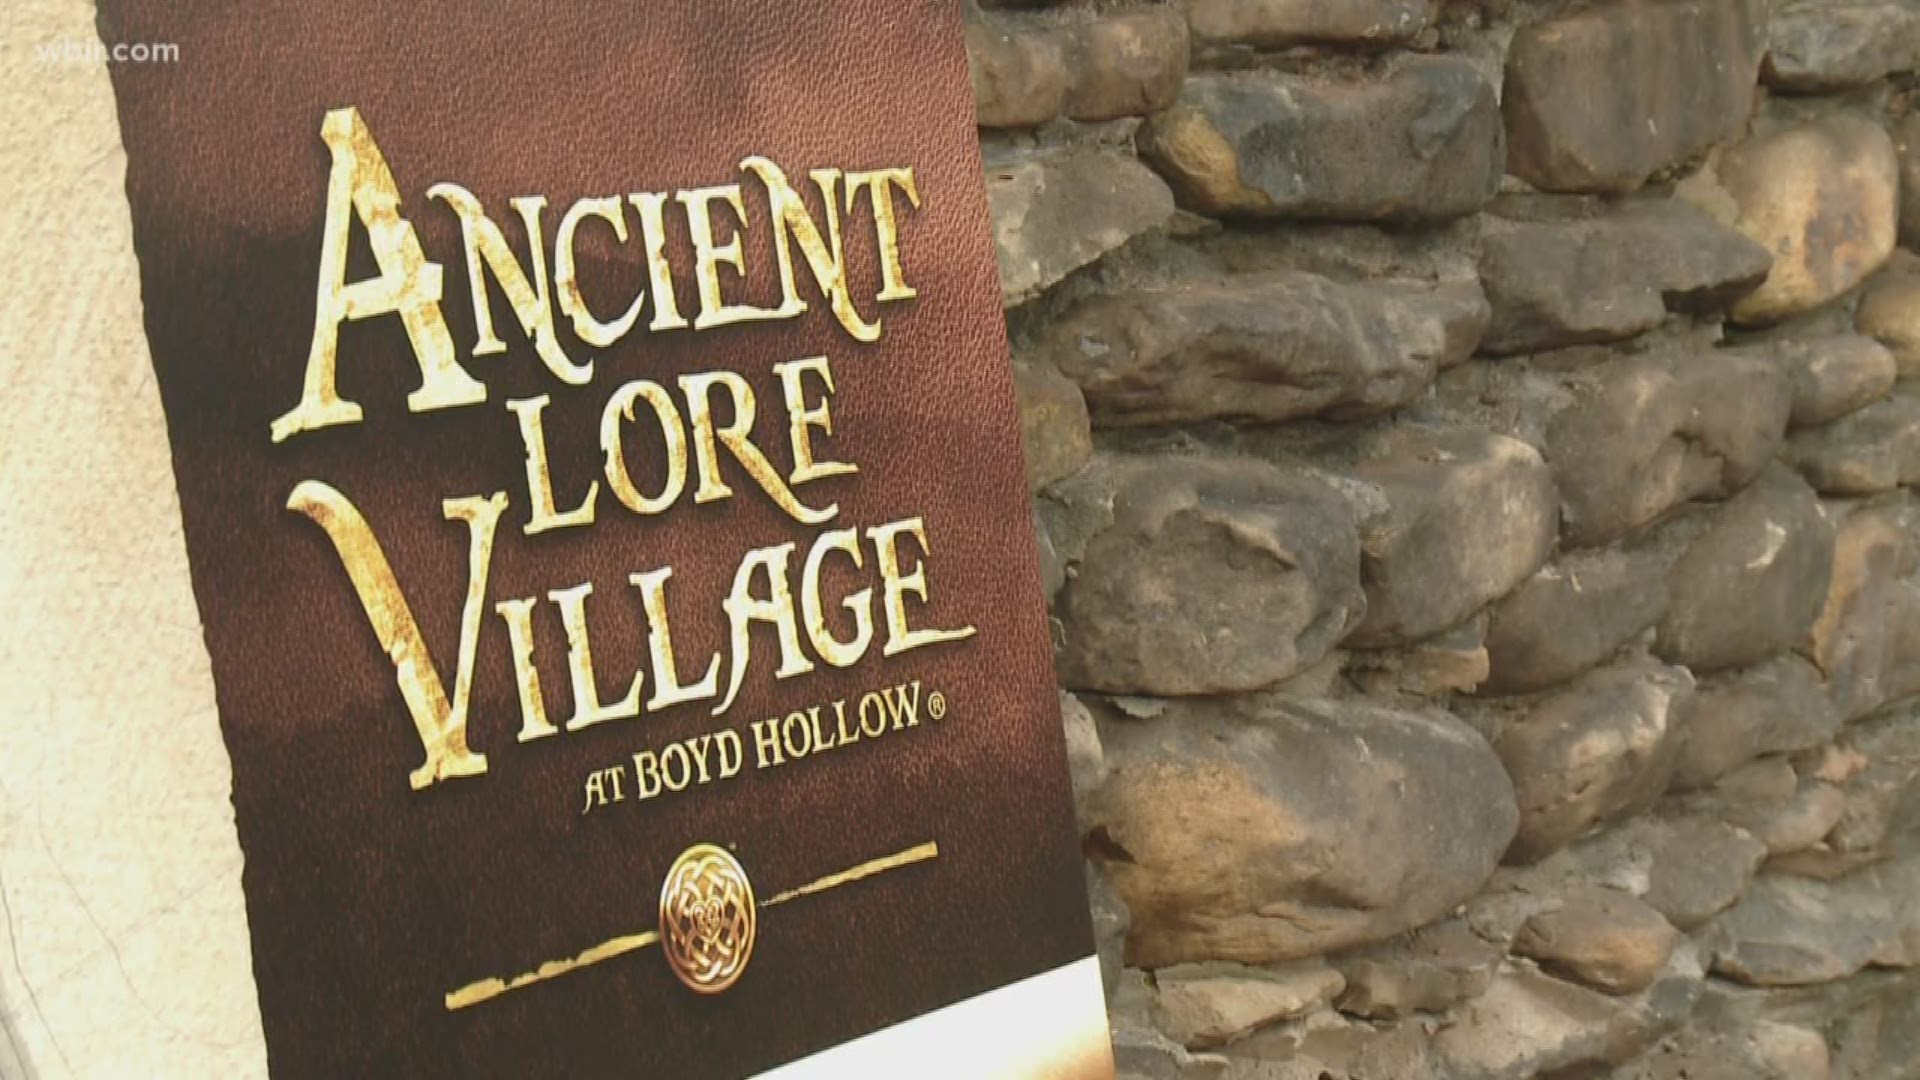 The fantasy resort has been the subject of some controversy among neighbors.